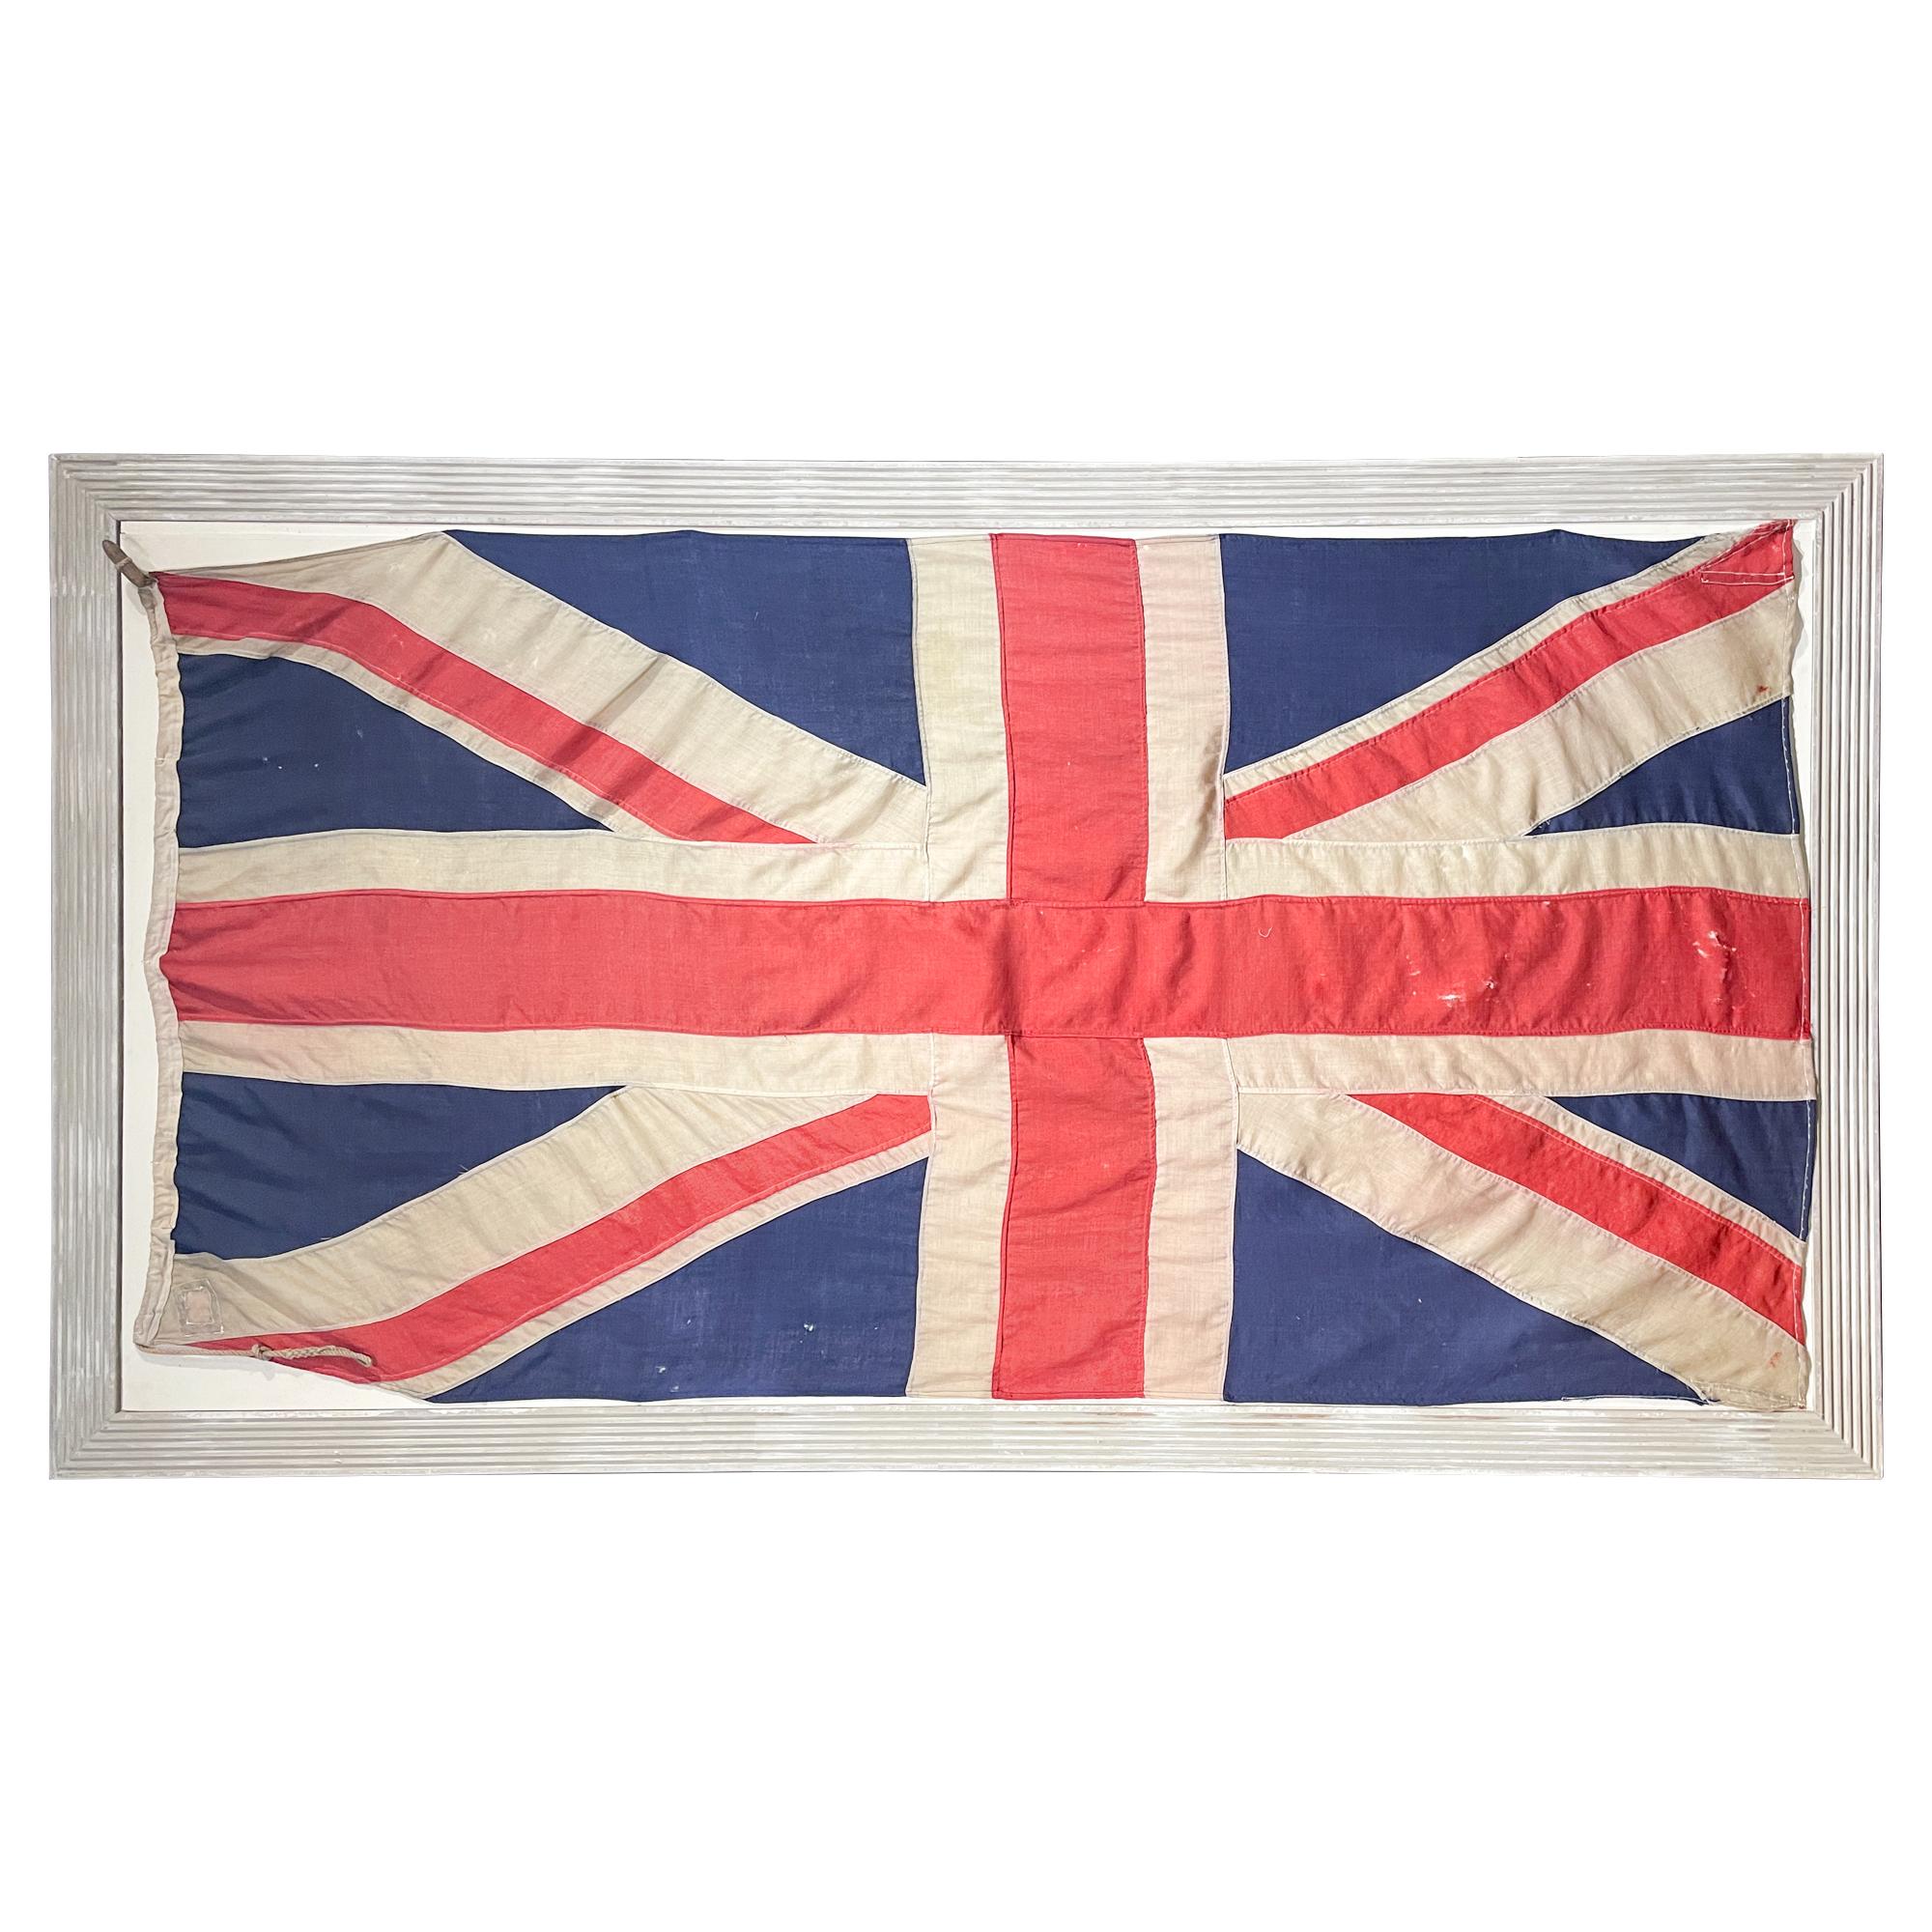 This large-scale antique Union Jack was sourced in England and has been mounted on a fluted wood frame in a pained greige finish. This frame can be hung either portrait or landscape orientation, as D-rings have been installed to accommodate either.